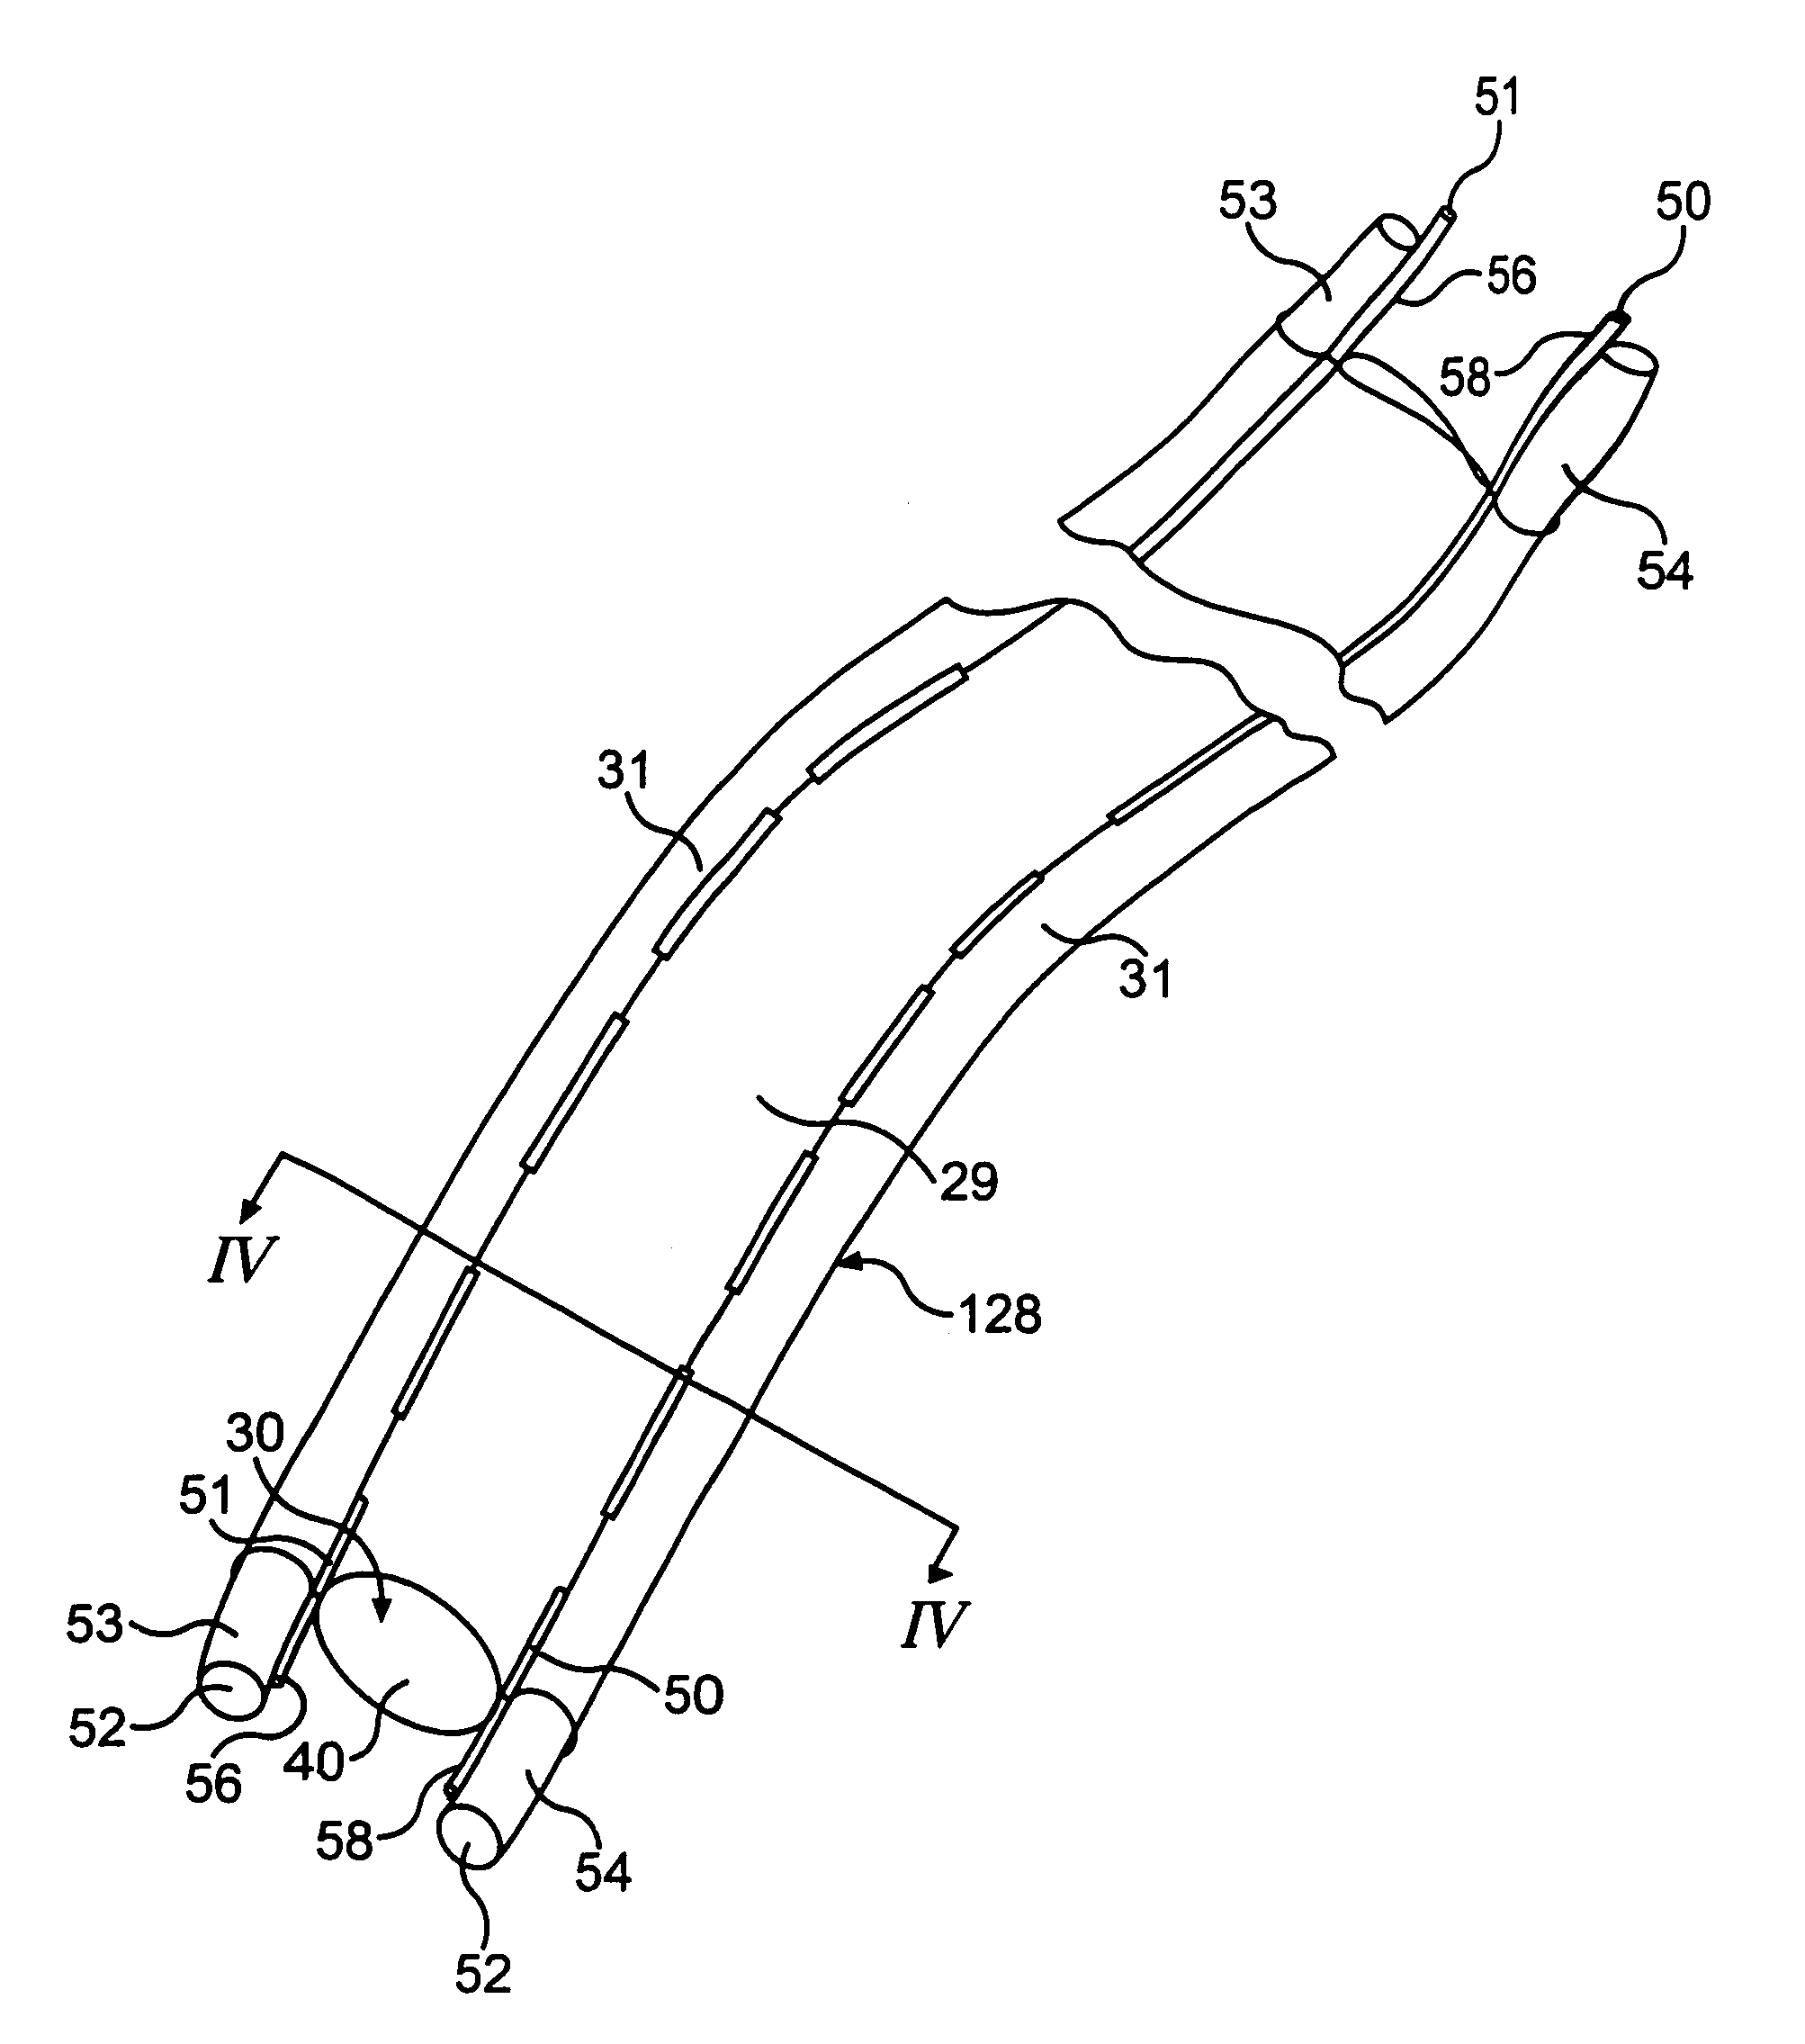 Controllable endoscopic sheath apparatus and related method of use